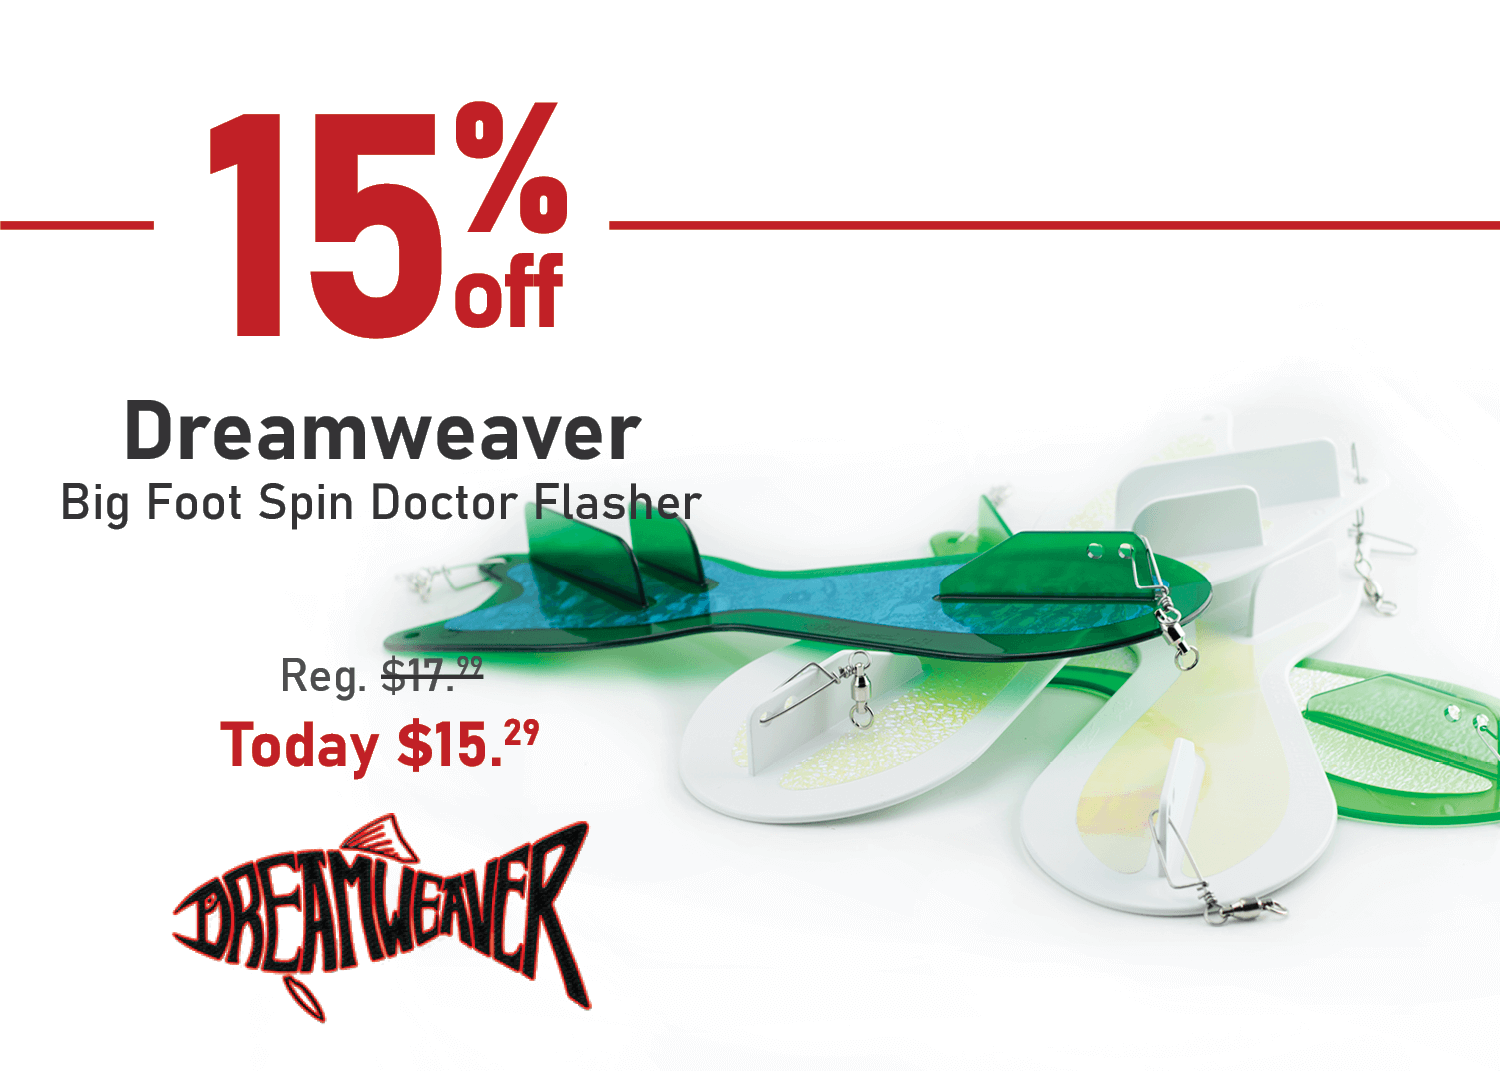 Save 15% on the Dreamweaver Big Foot Spin Doctor Flasher